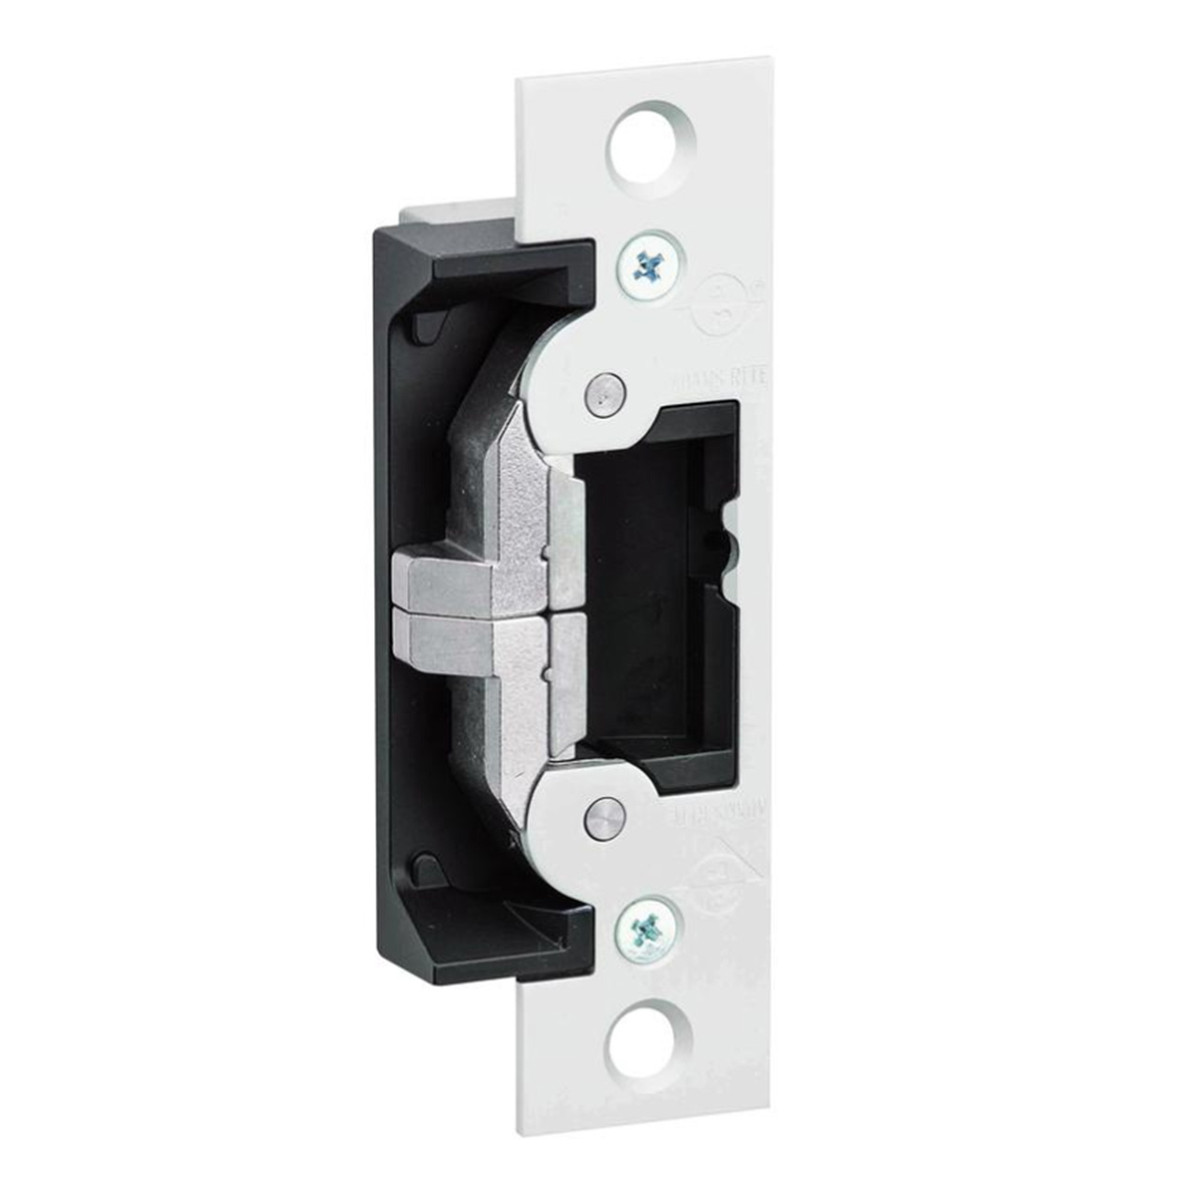 Adams Rite 7440-M-628 UltraLine Electric Strike With Monitored Feature, 12/24 VDC, Fail Safe/Fail Secure, Clear Anodized